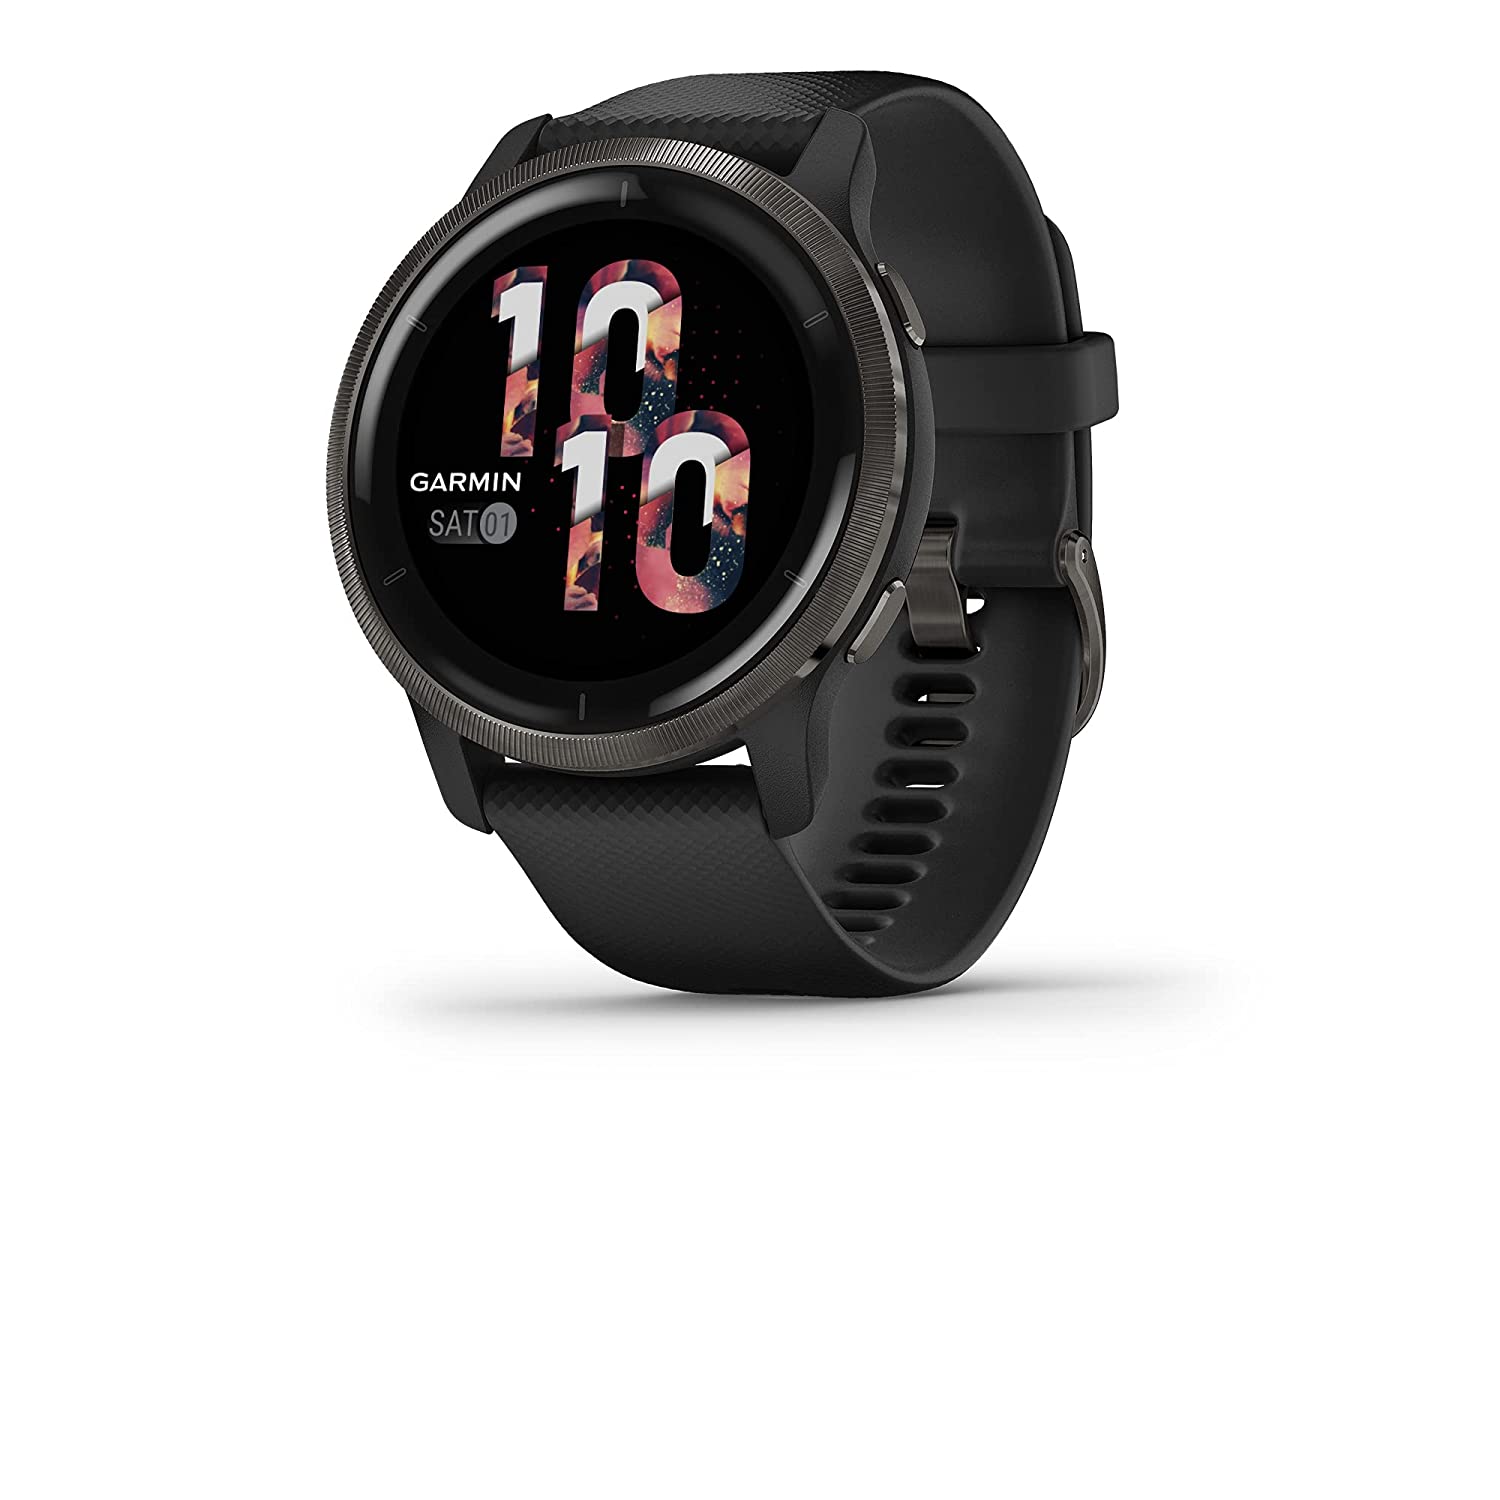 Garmin Venue 2 is one of the best smartwatches for men in India